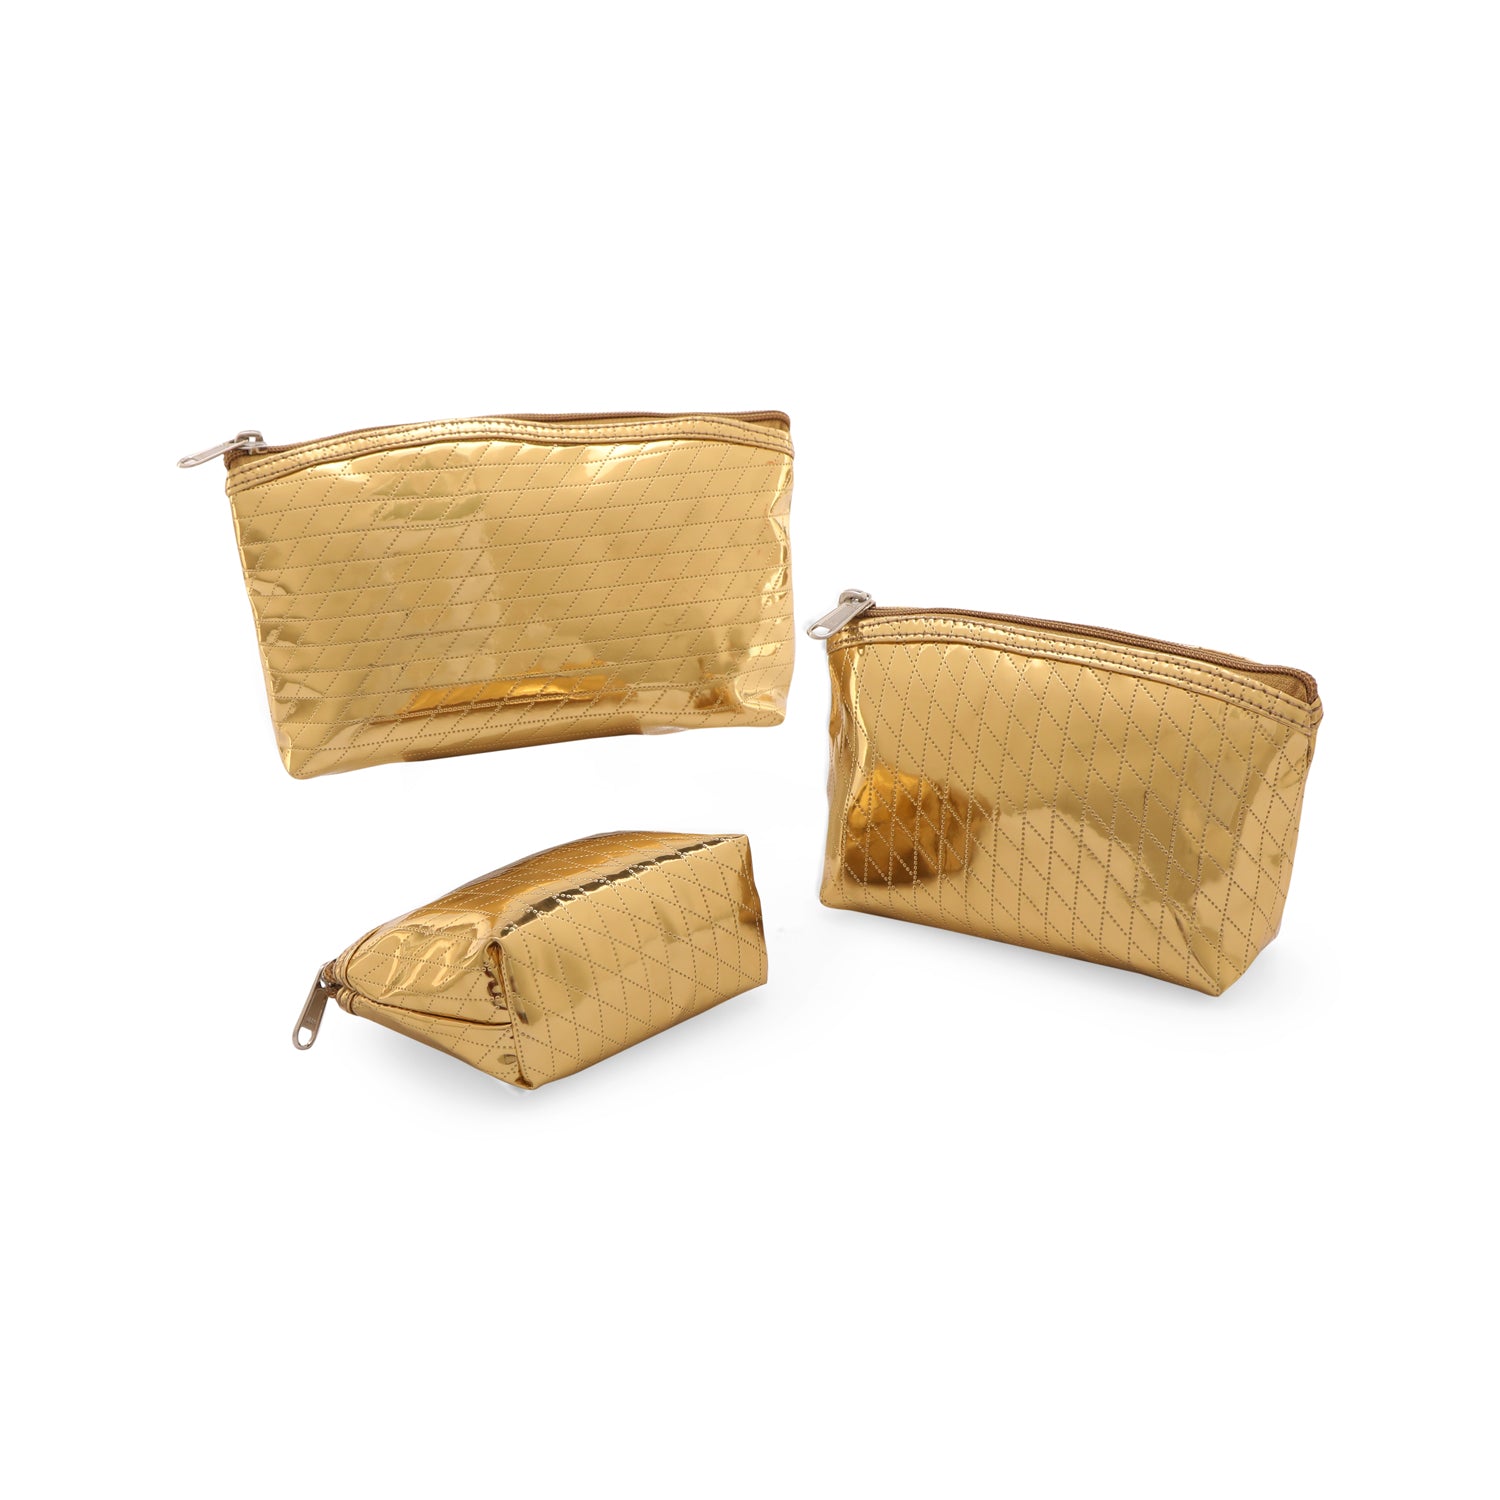 Travel Pouch  - Gold Travel Pouches - Set of 3 Pouches